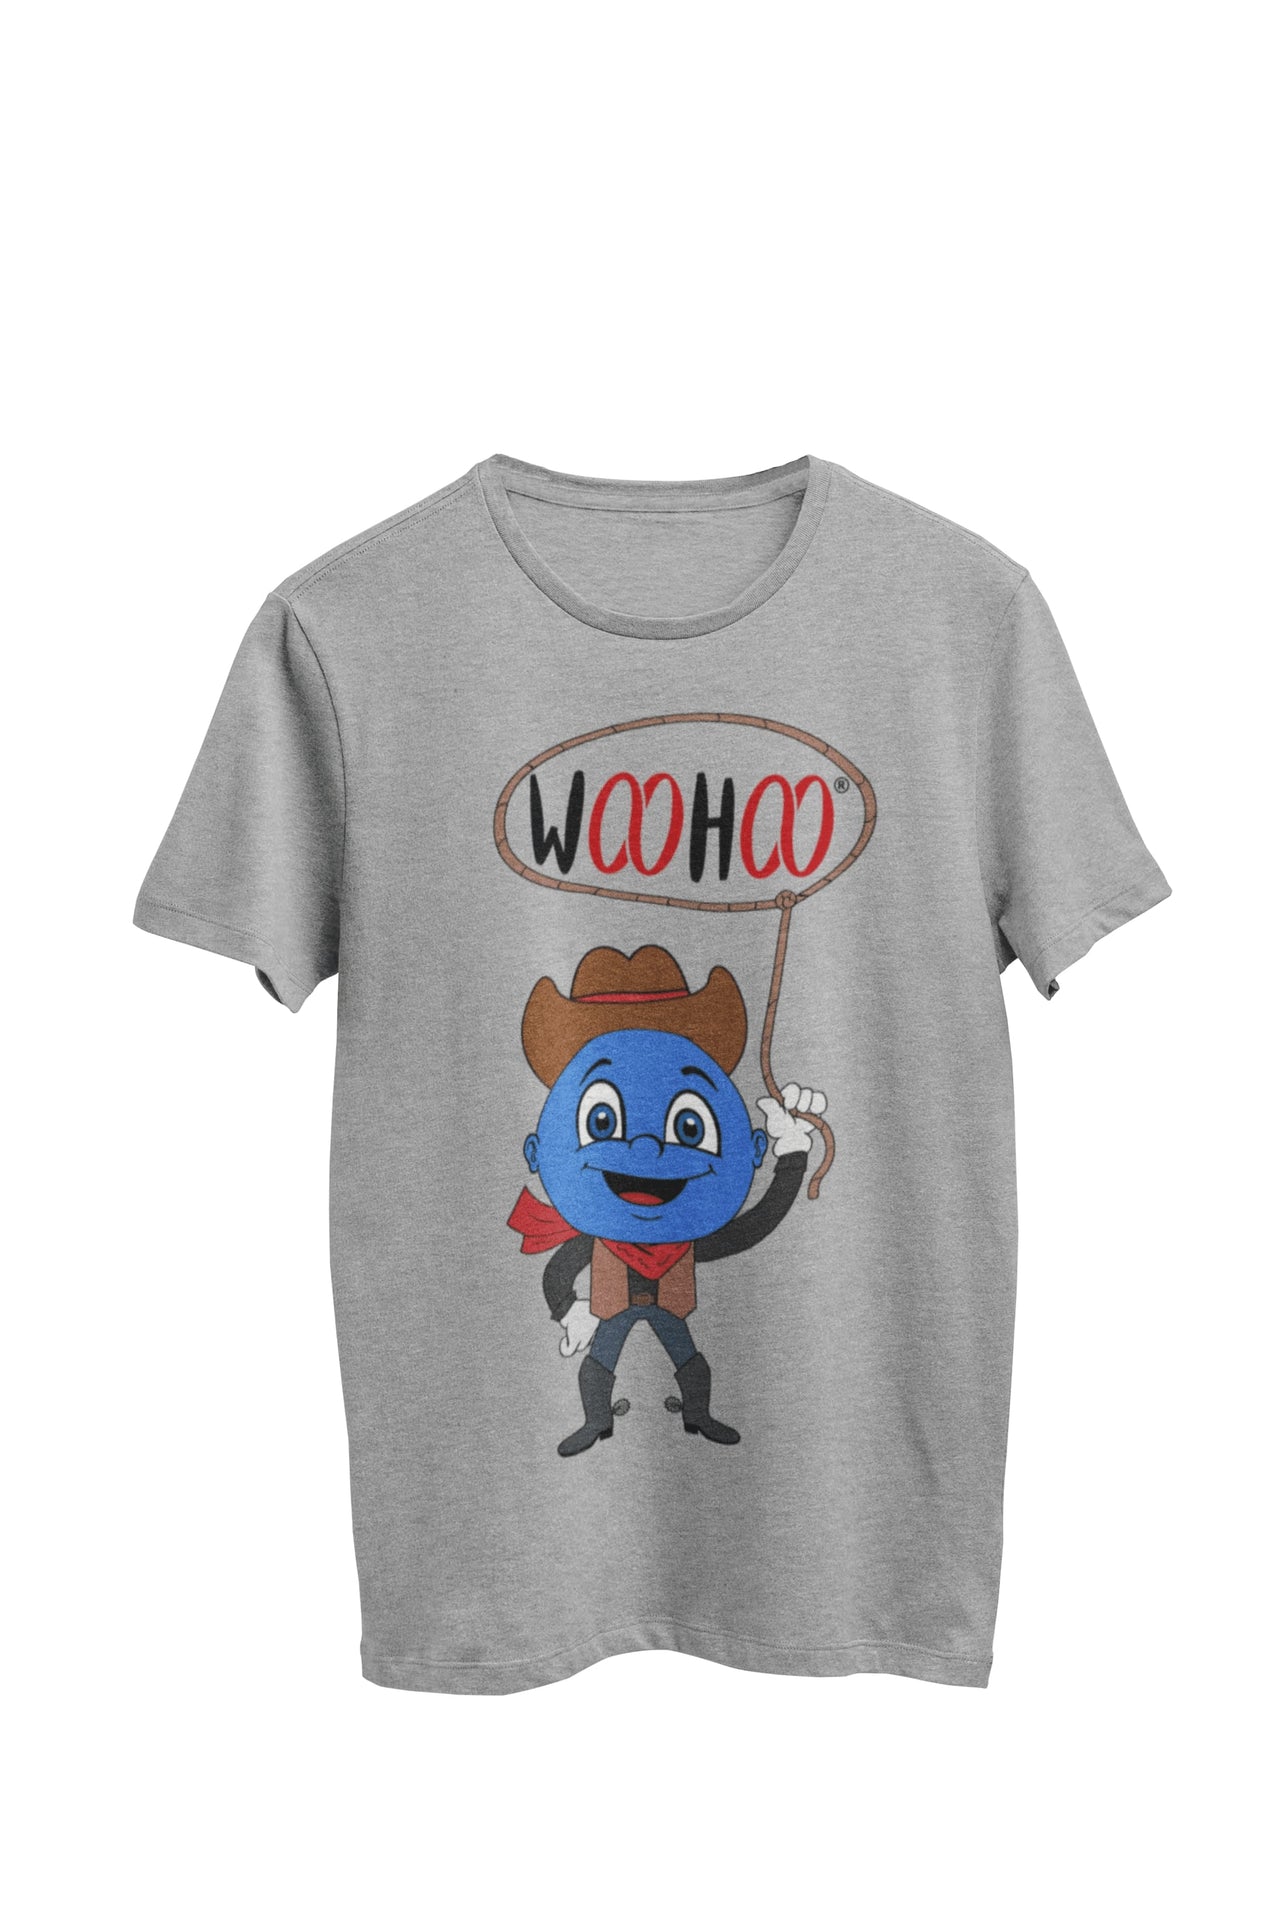 WooHooBerry dressed in a cowboy outfit, confidently swinging a lasso above their head to form the word 'WooHoo.' The gray T-shirt complements the spirited Western-themed scene.